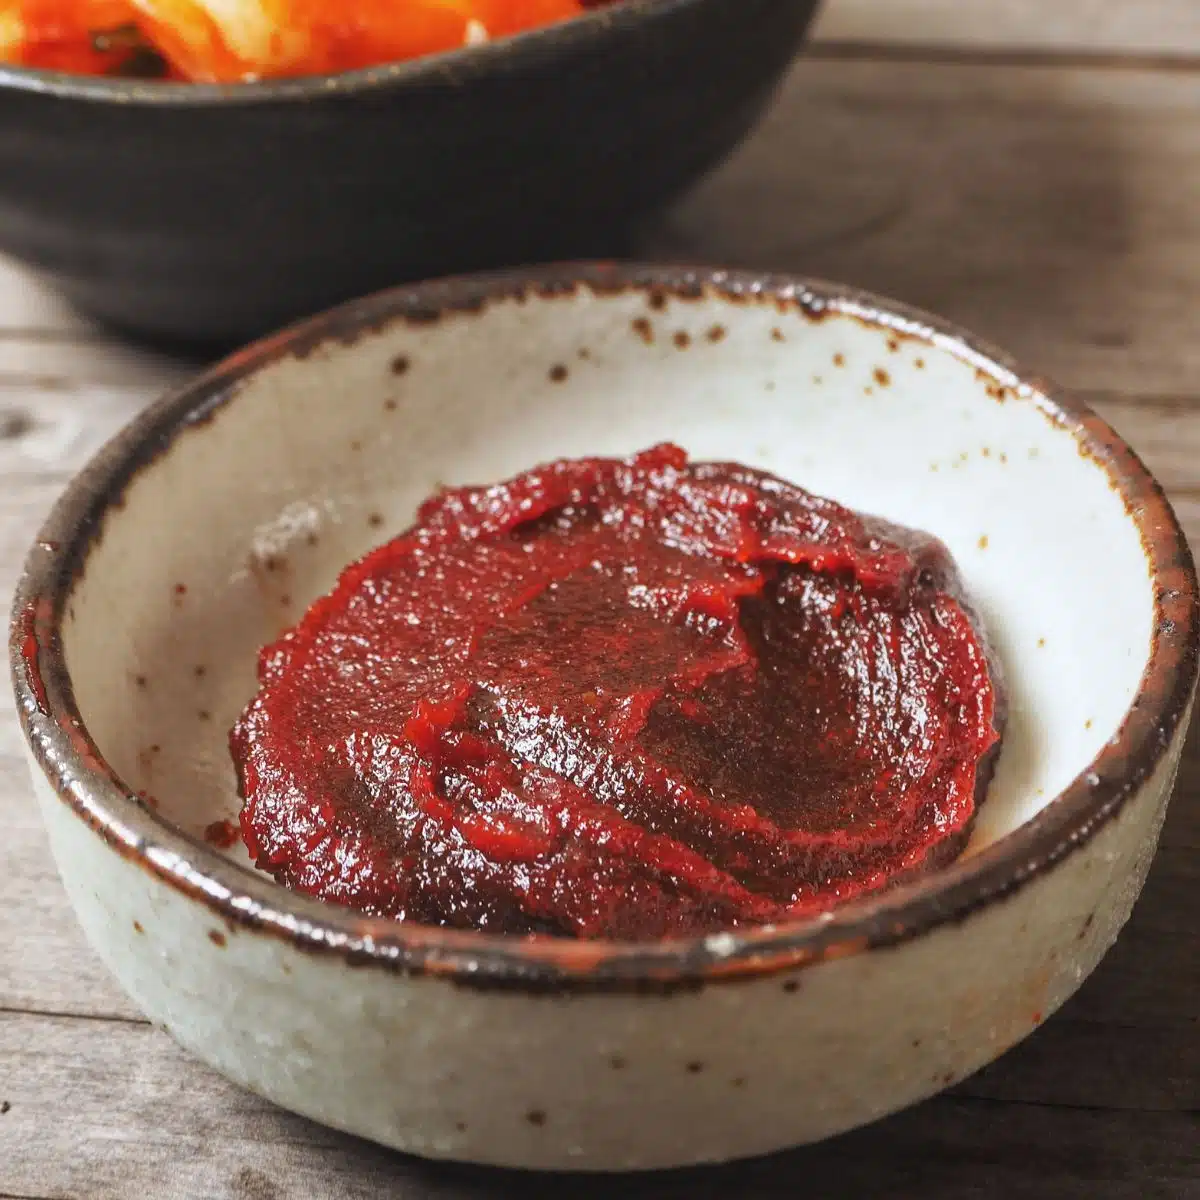 Square image showing Gochujang in a small bowl.